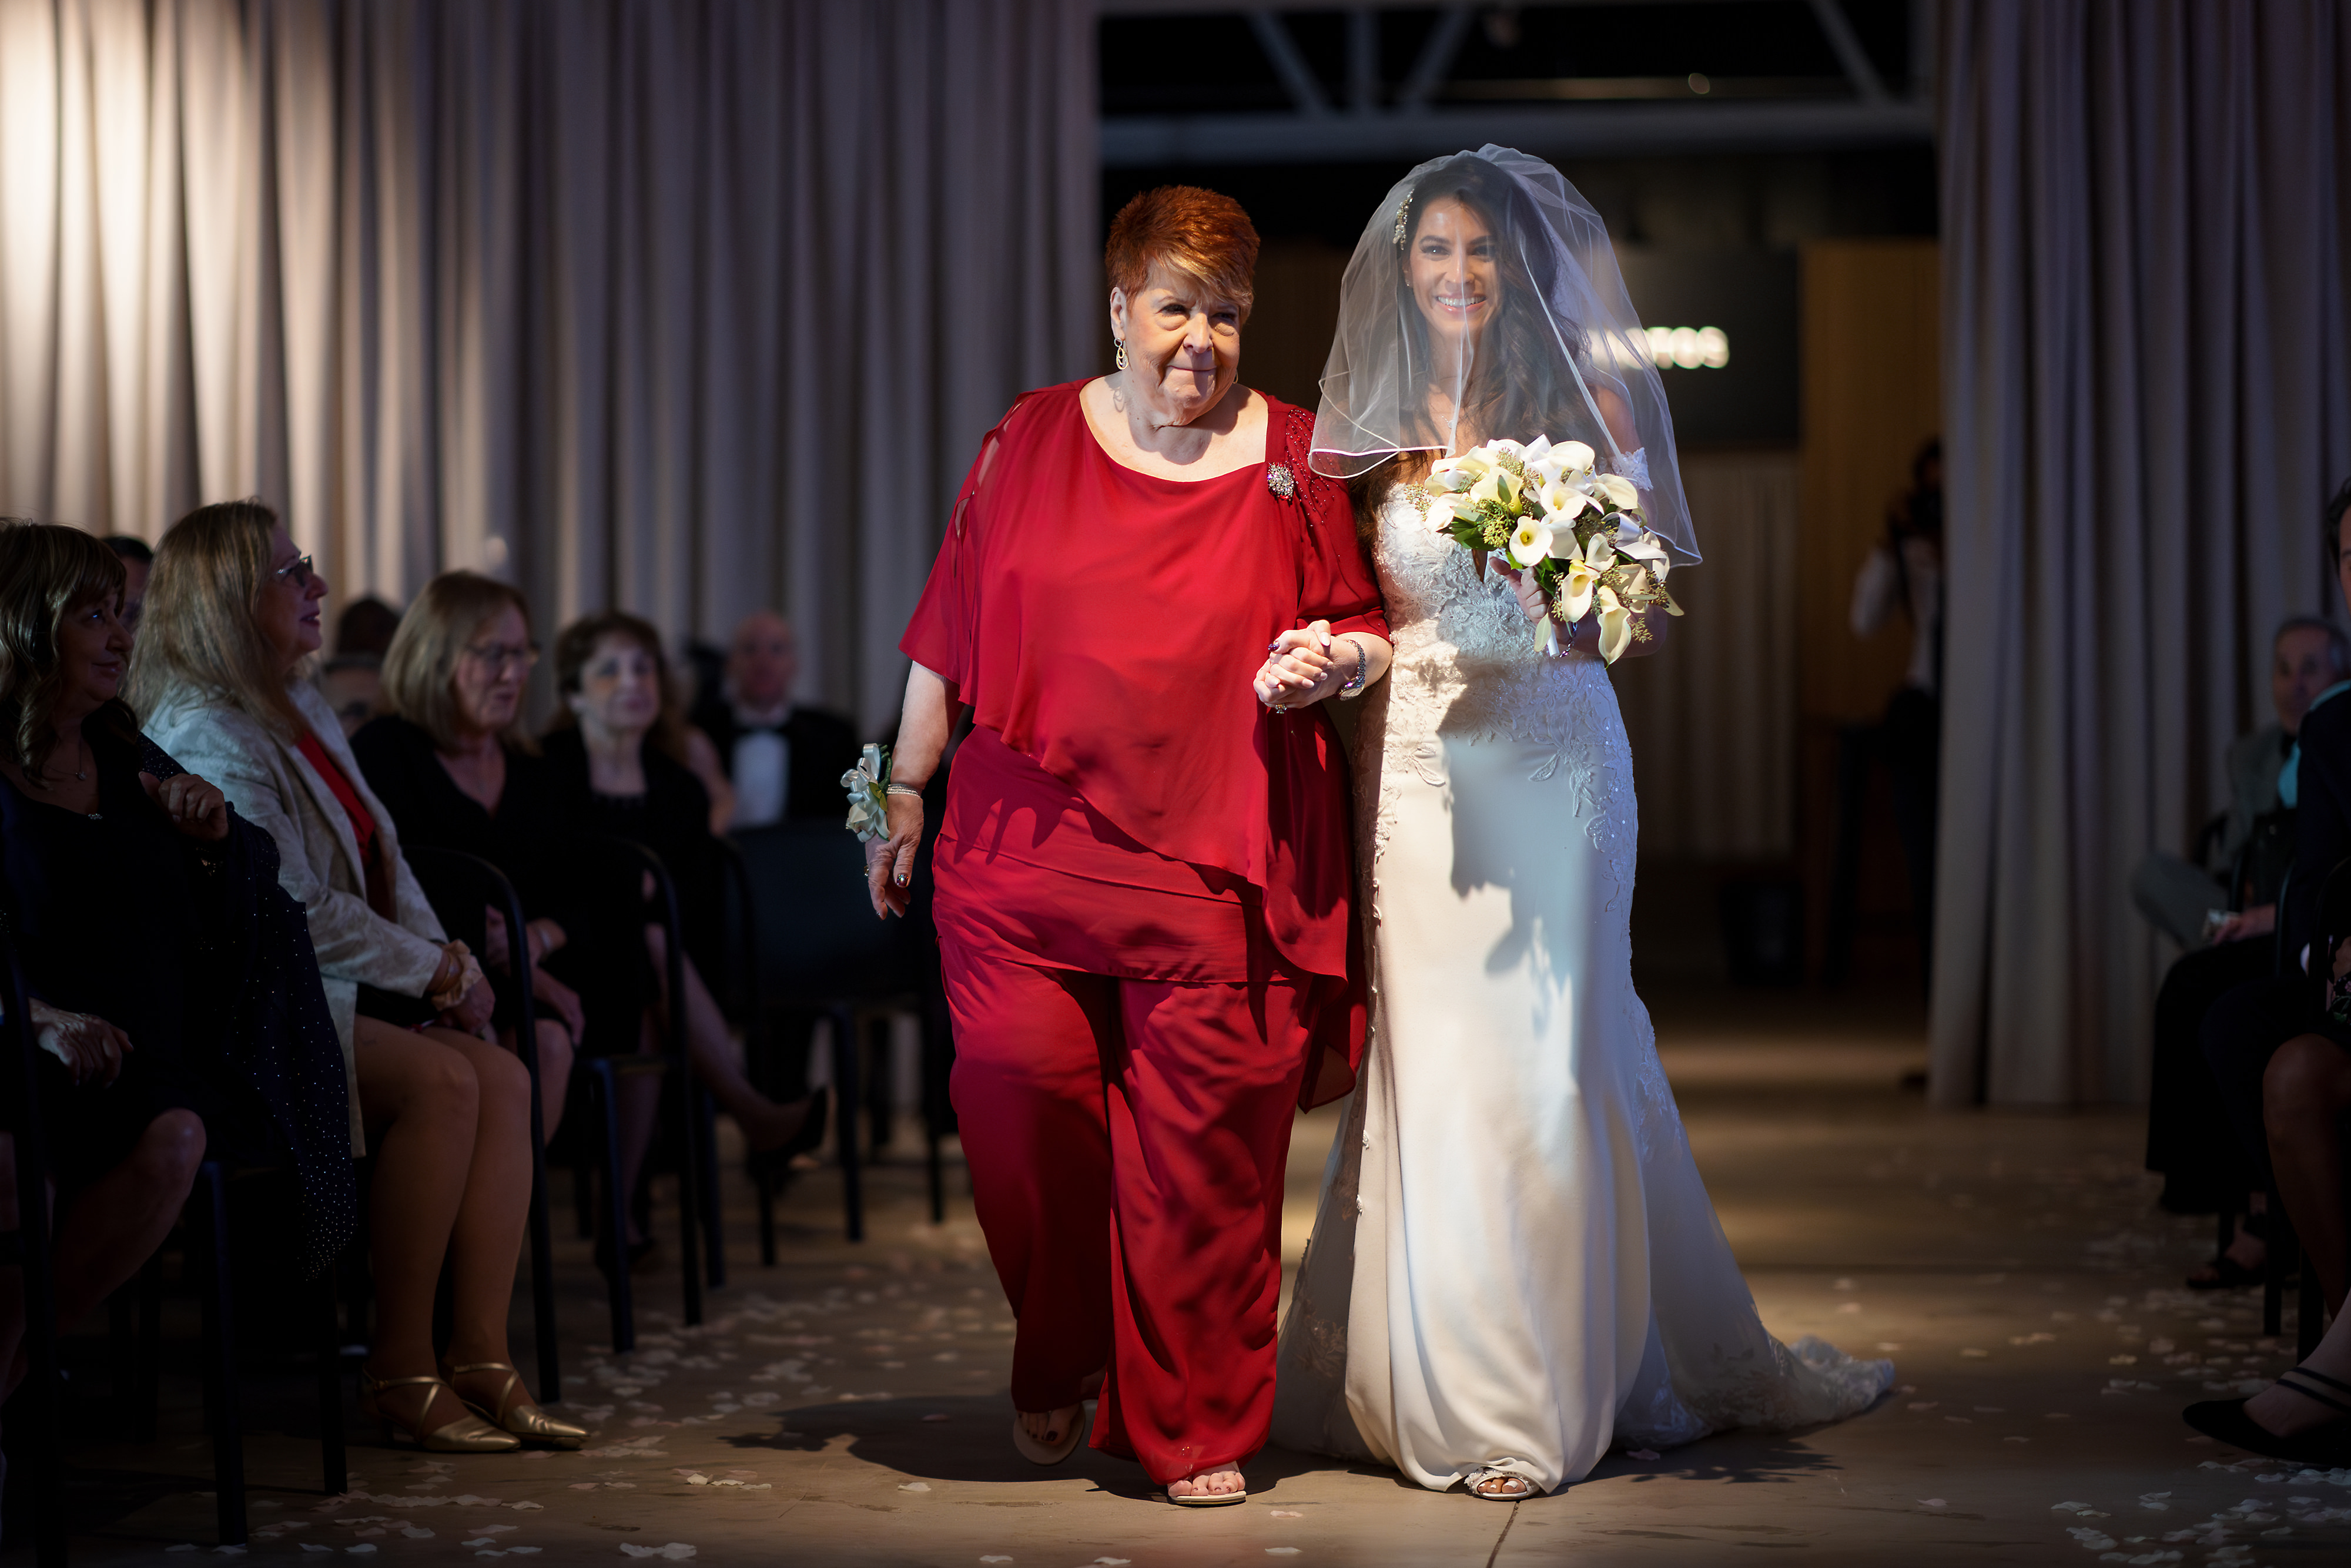 Bride walks down the aisle with mother during wedding ceremony at Sarabande in Chicago